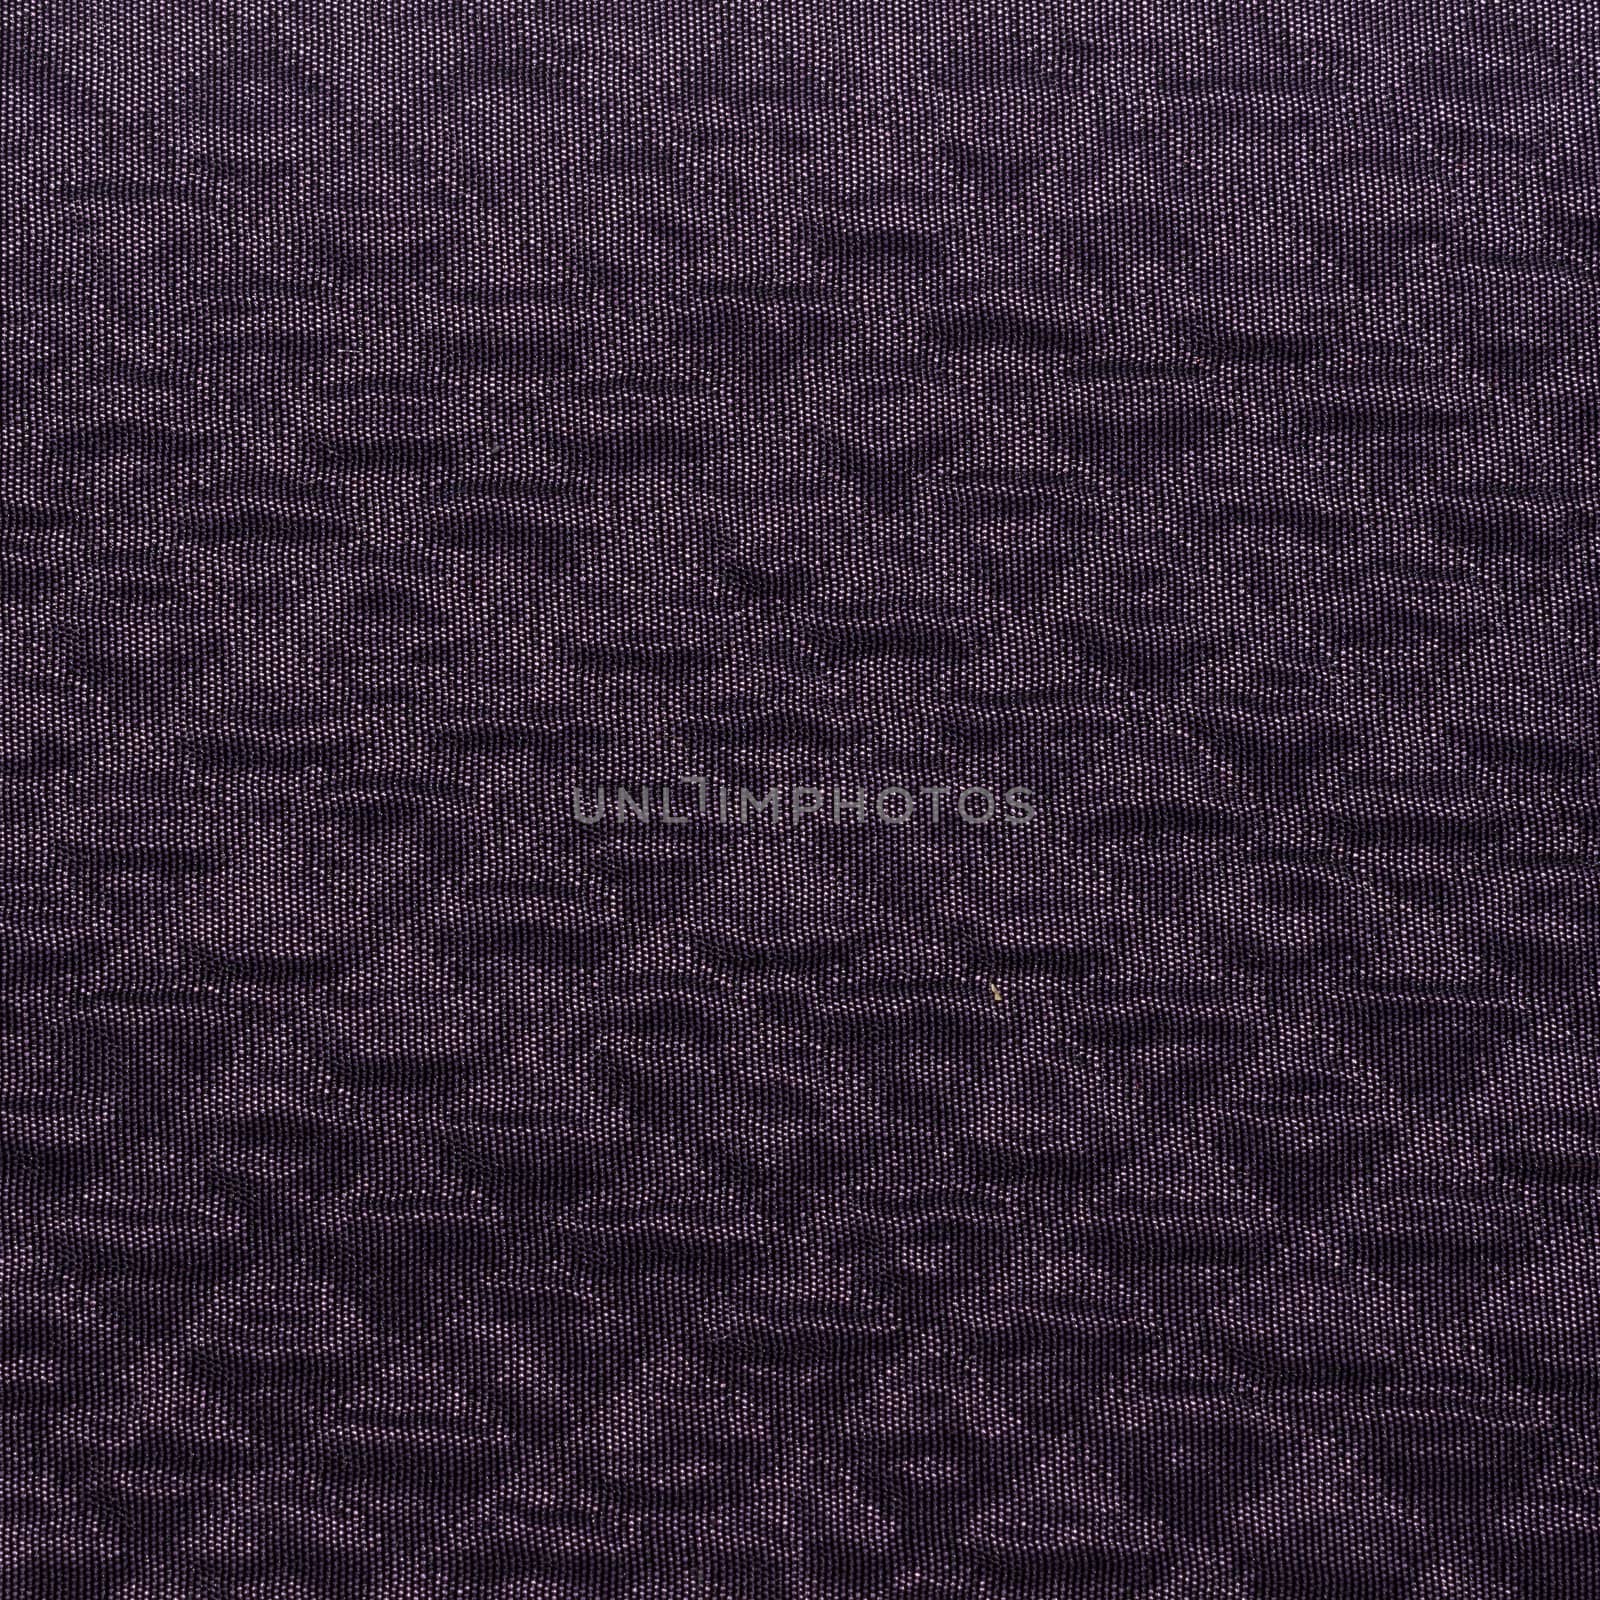 Rustic canvas fabric texture in aubergine color and  a diamond pattern. Square shape